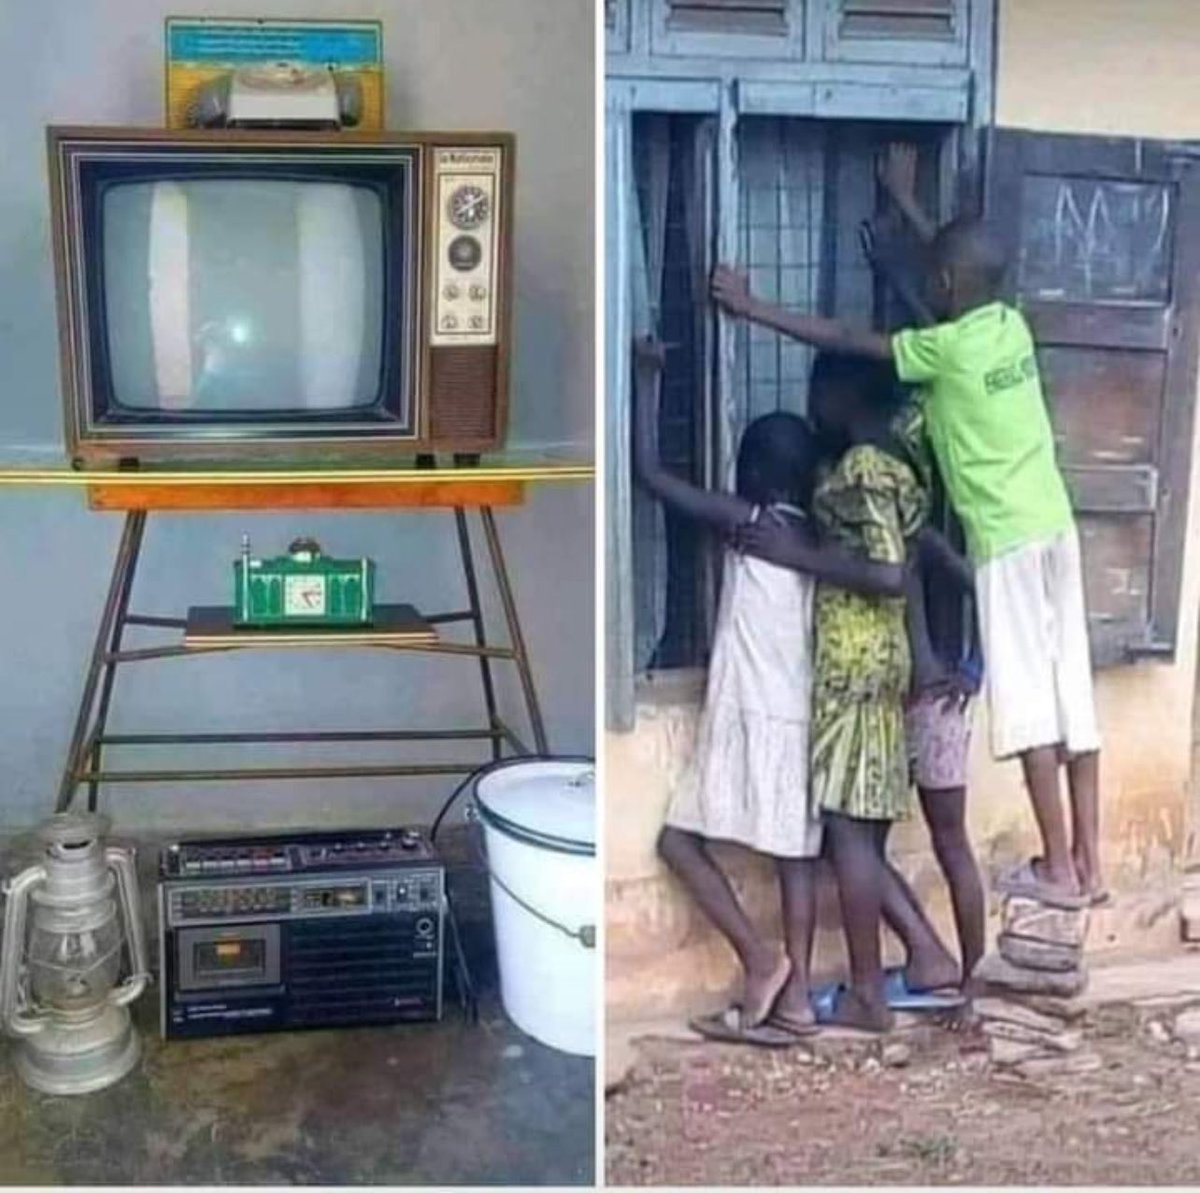 Only legends will understand the connection between these two pictures….. if you know you know.